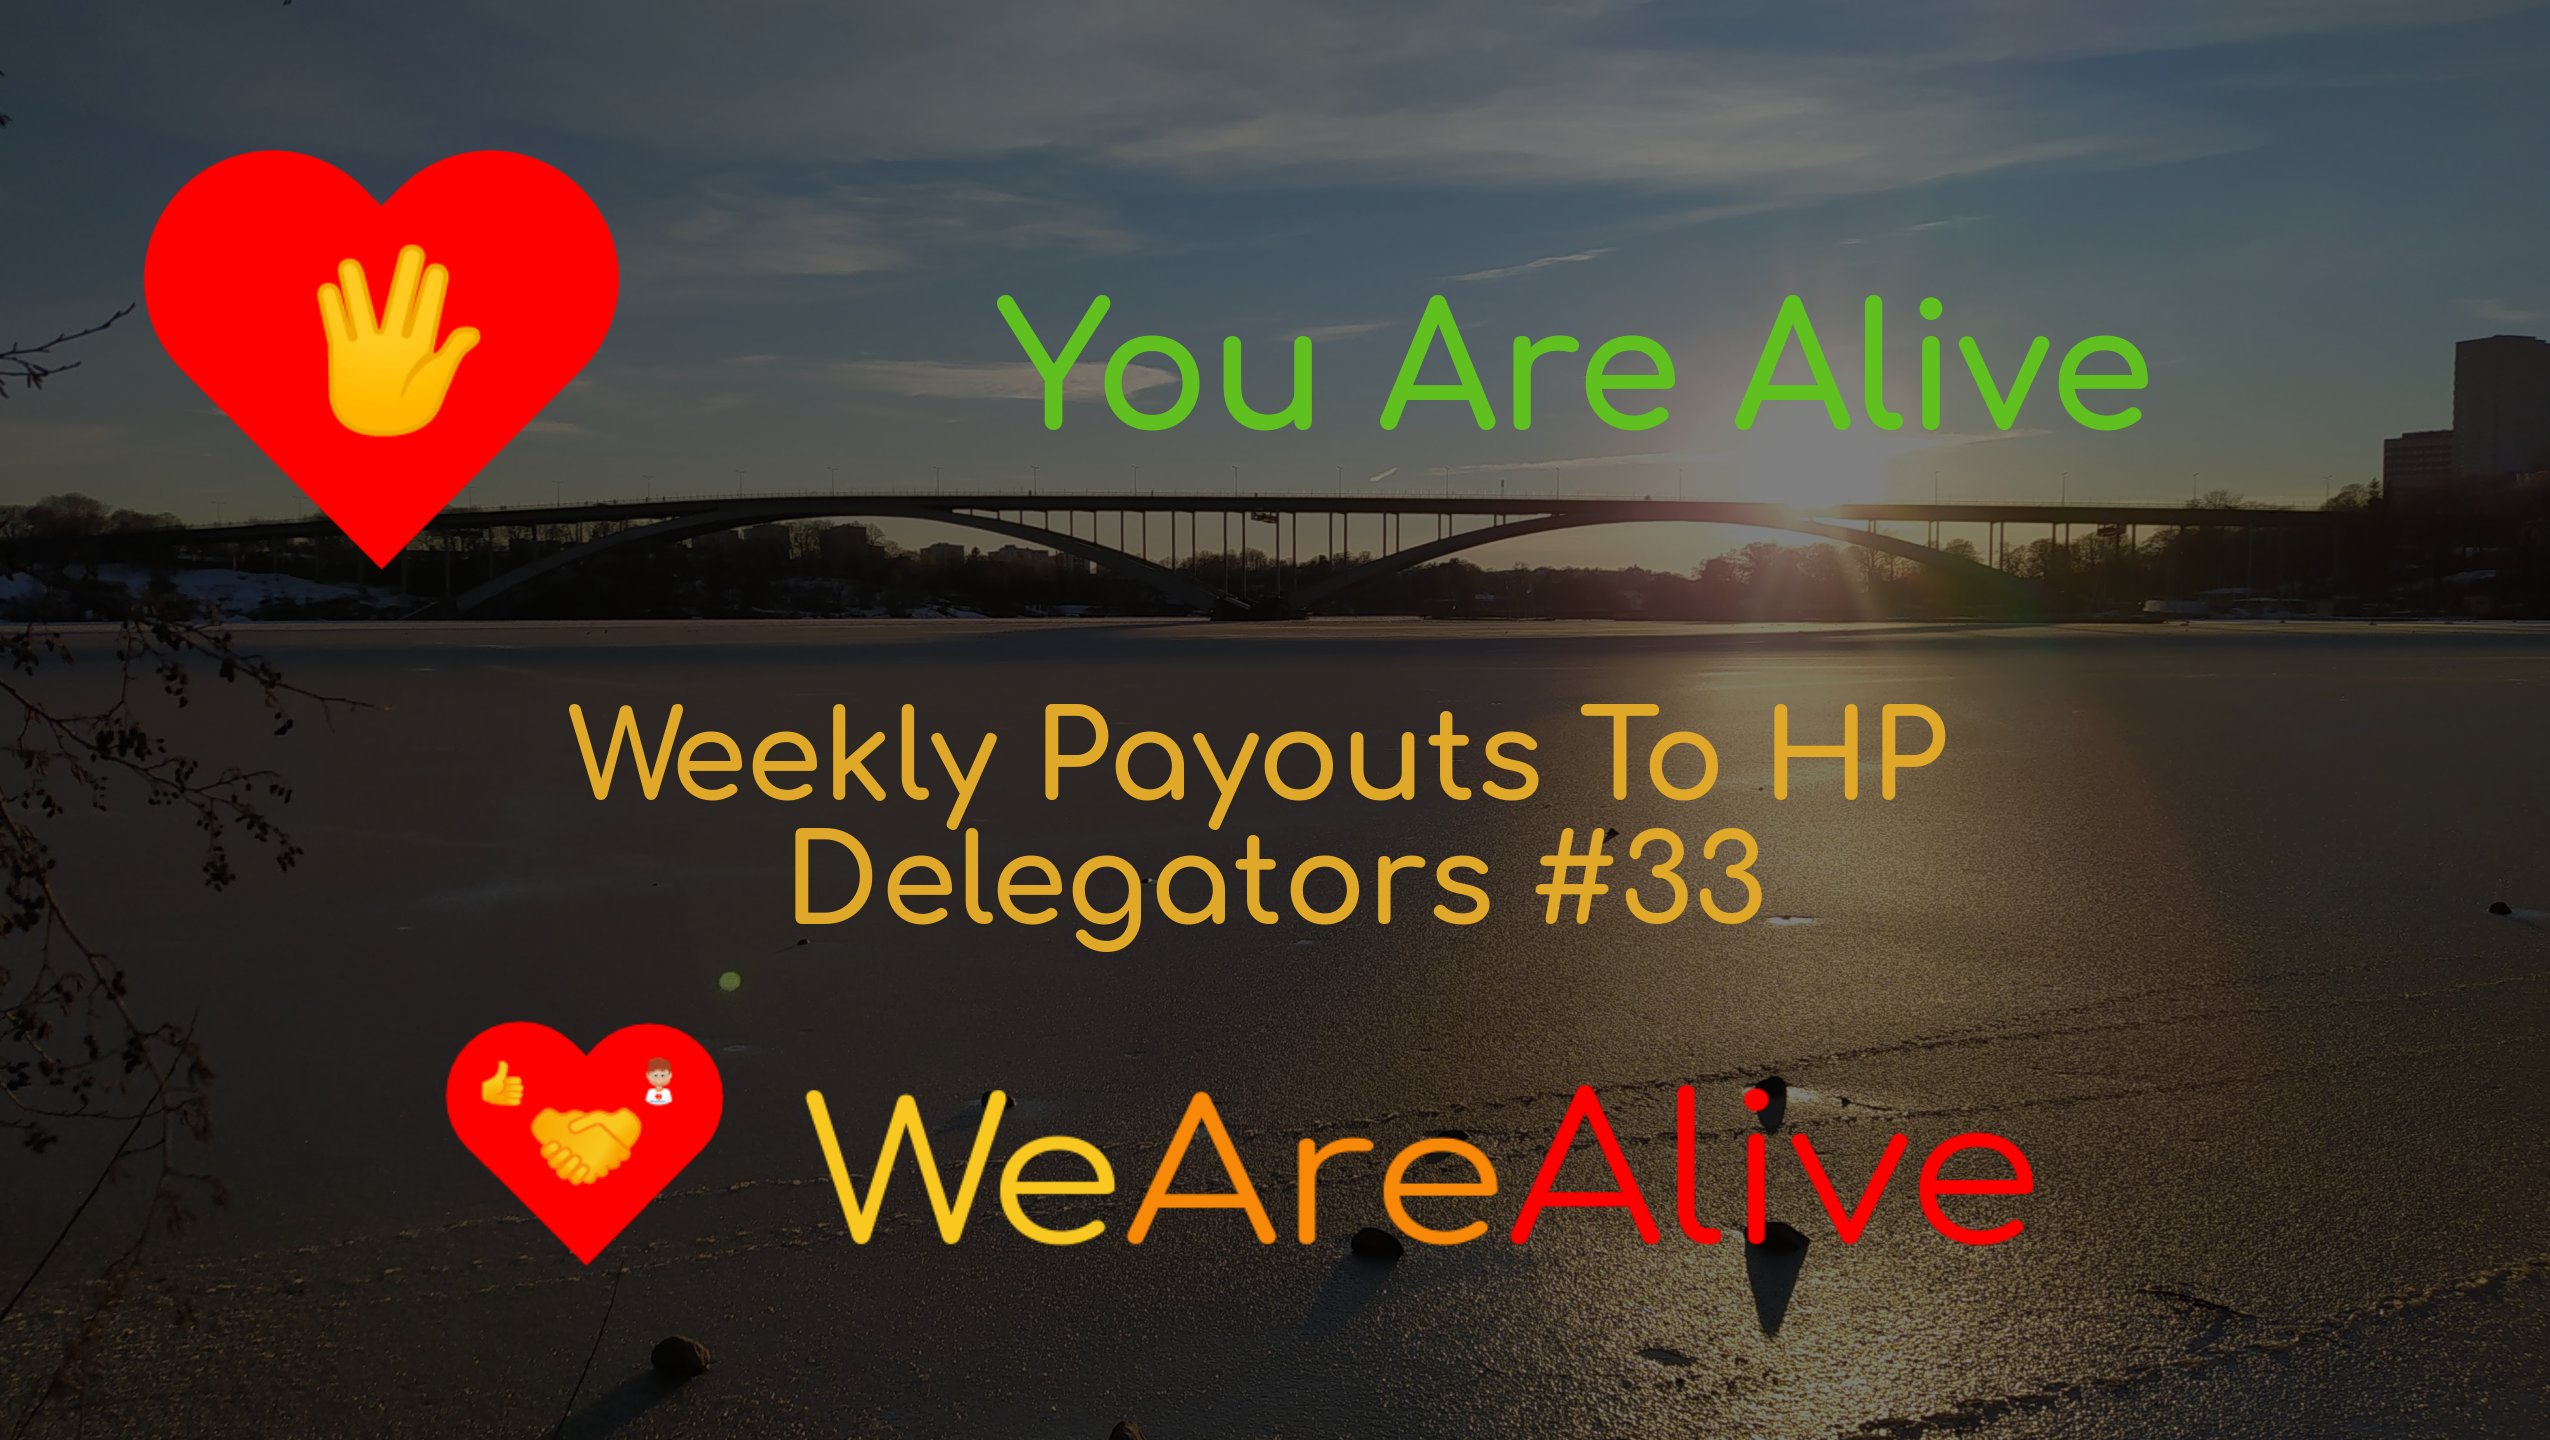 @youarealive/you-are-alive-weekly-payouts-to-hp-delegators-33